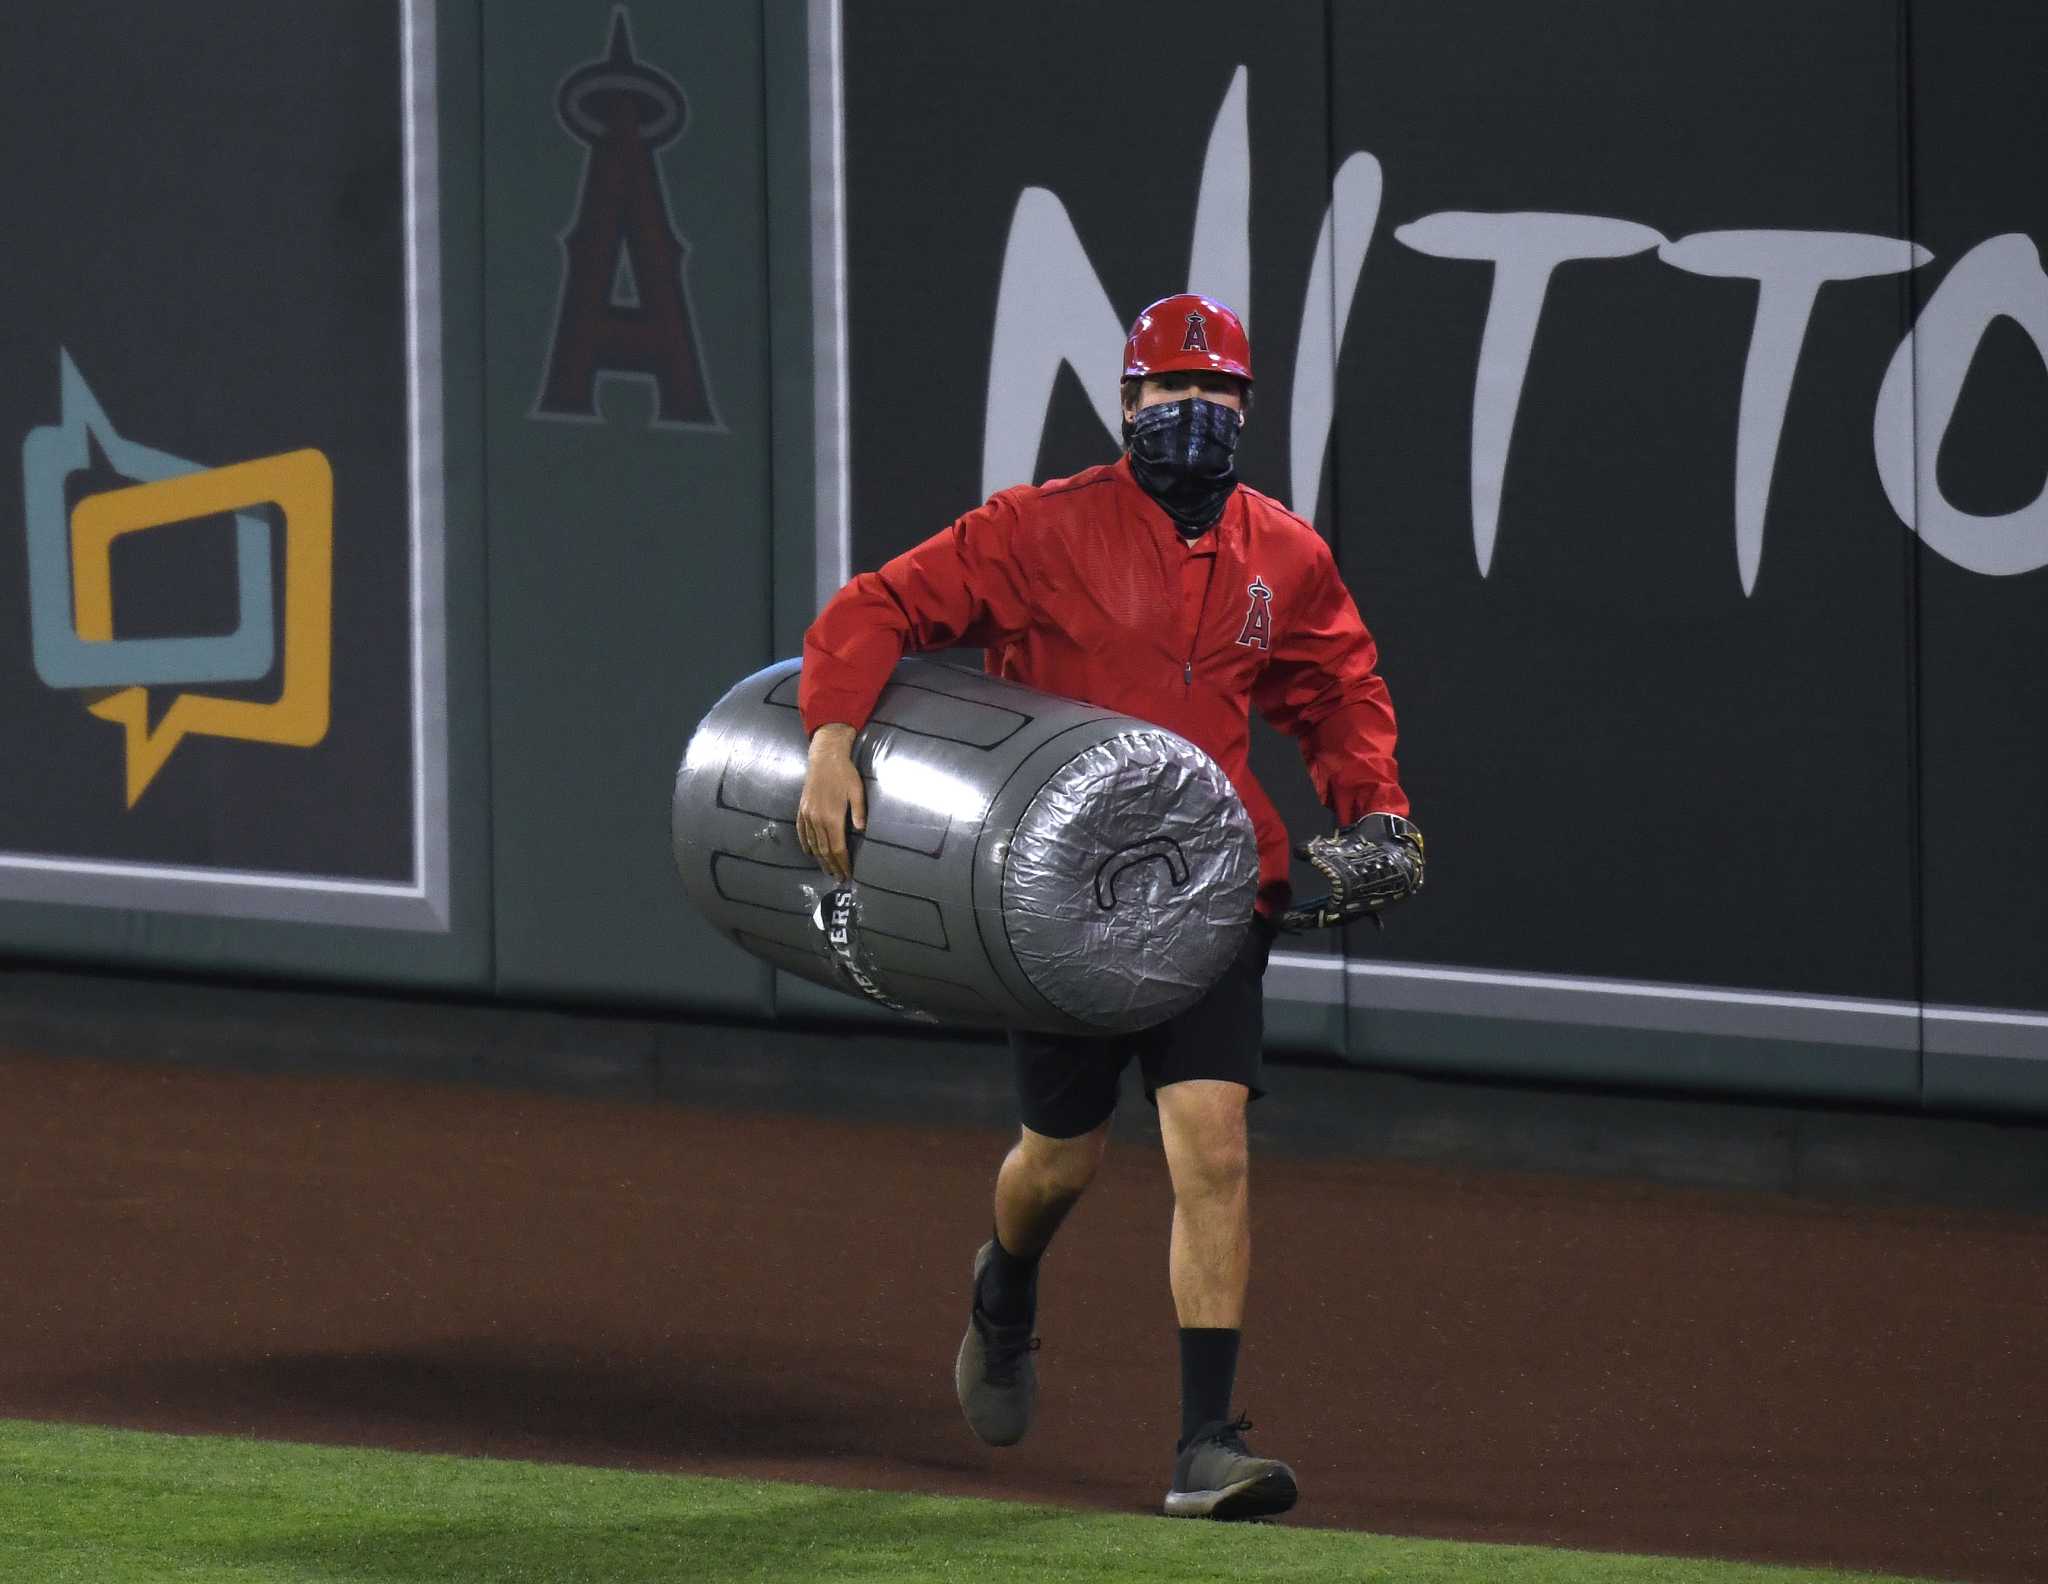 Angels fans throw trash cans on the field during win over Astros